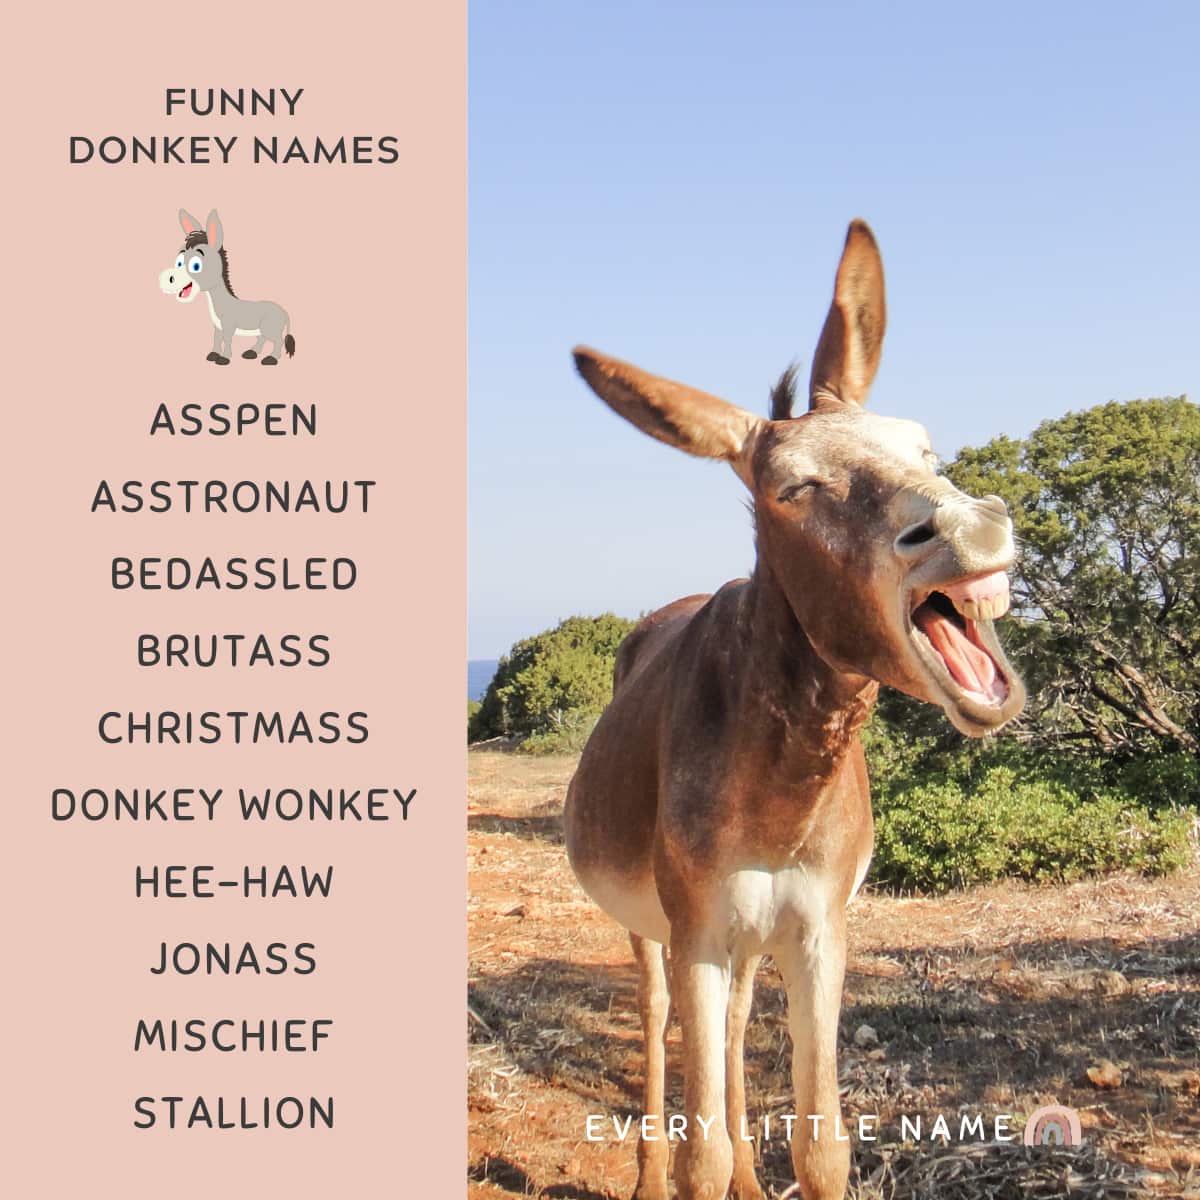 Donkey laughing and a list of funny donkey names.